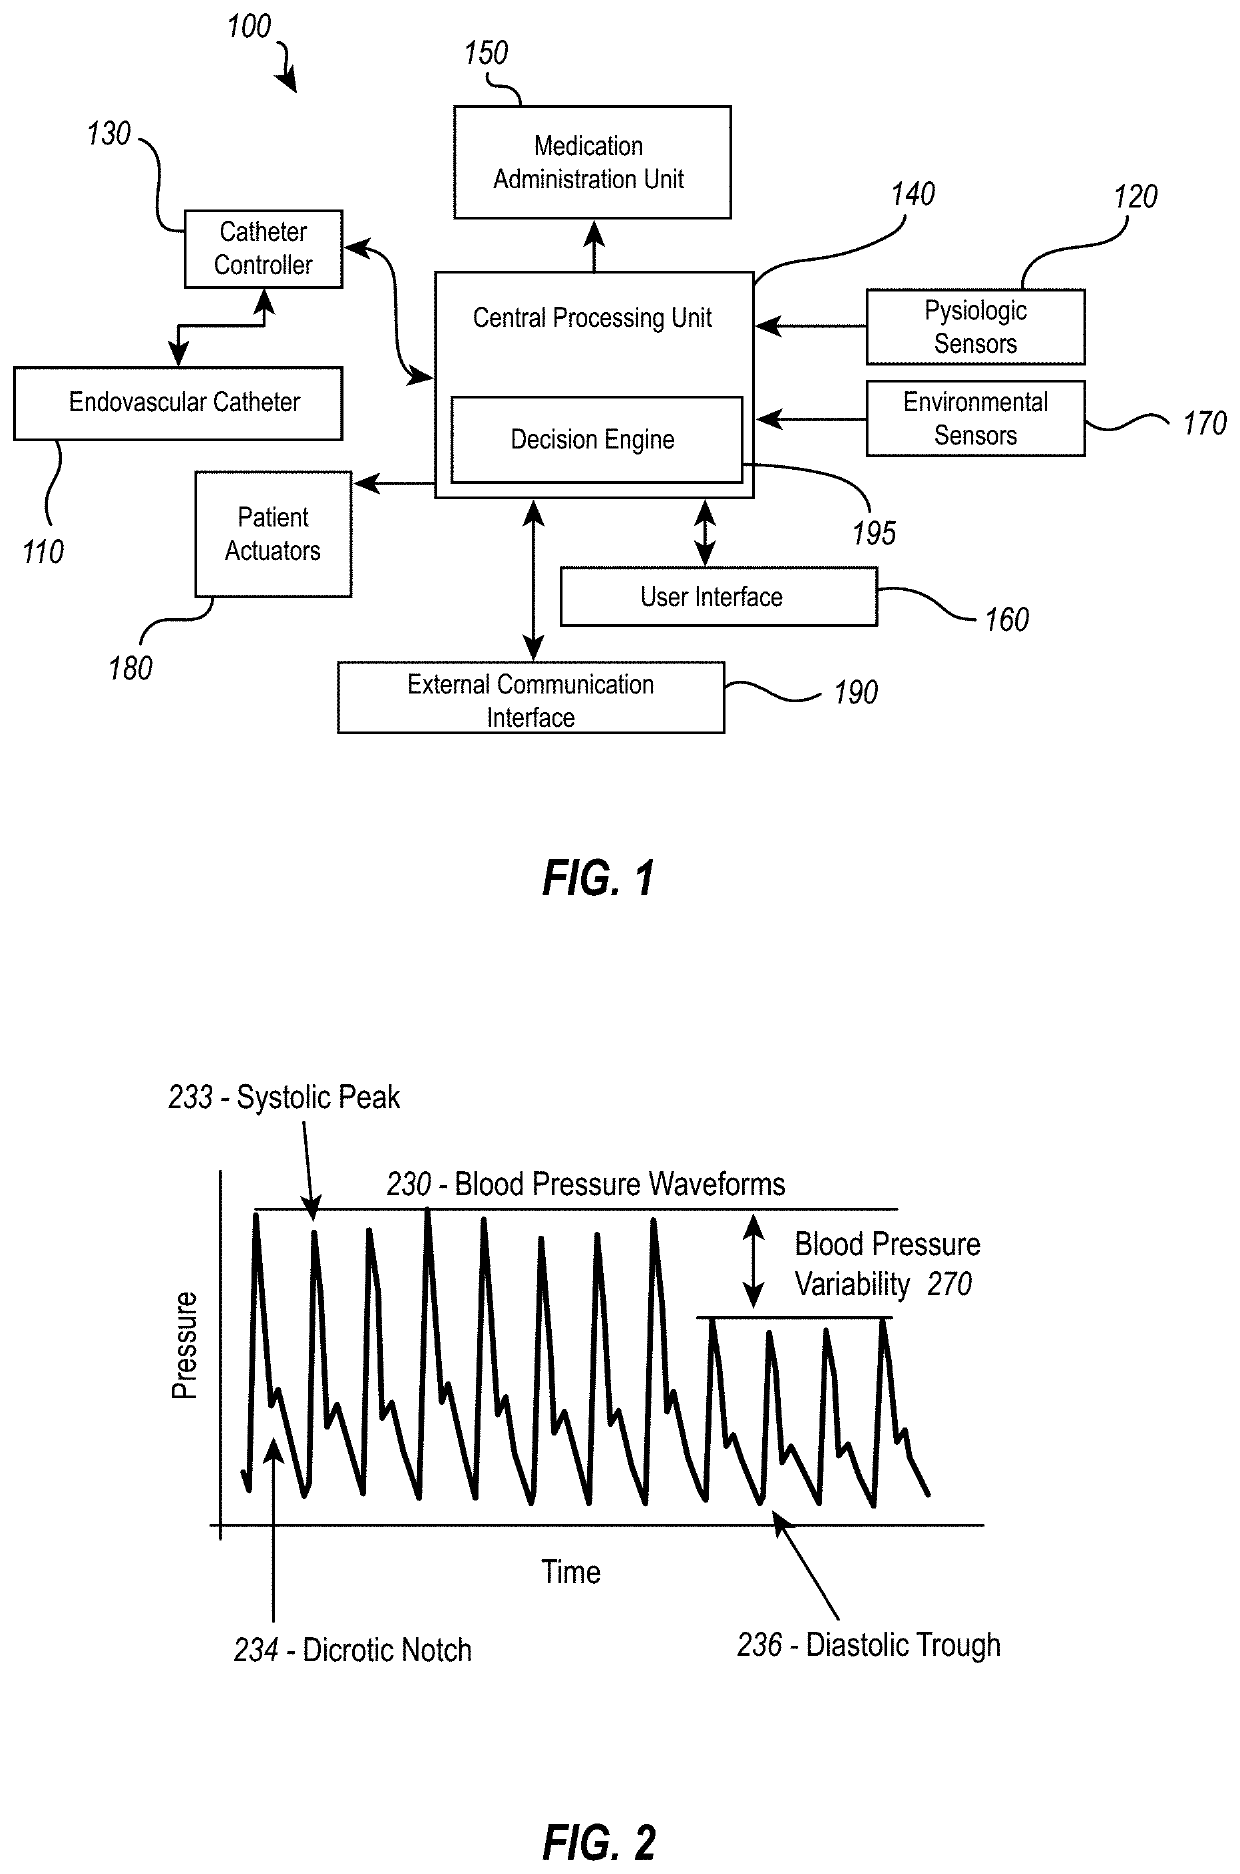 Blood pressure regulation system for the treatment of neurologic injuries